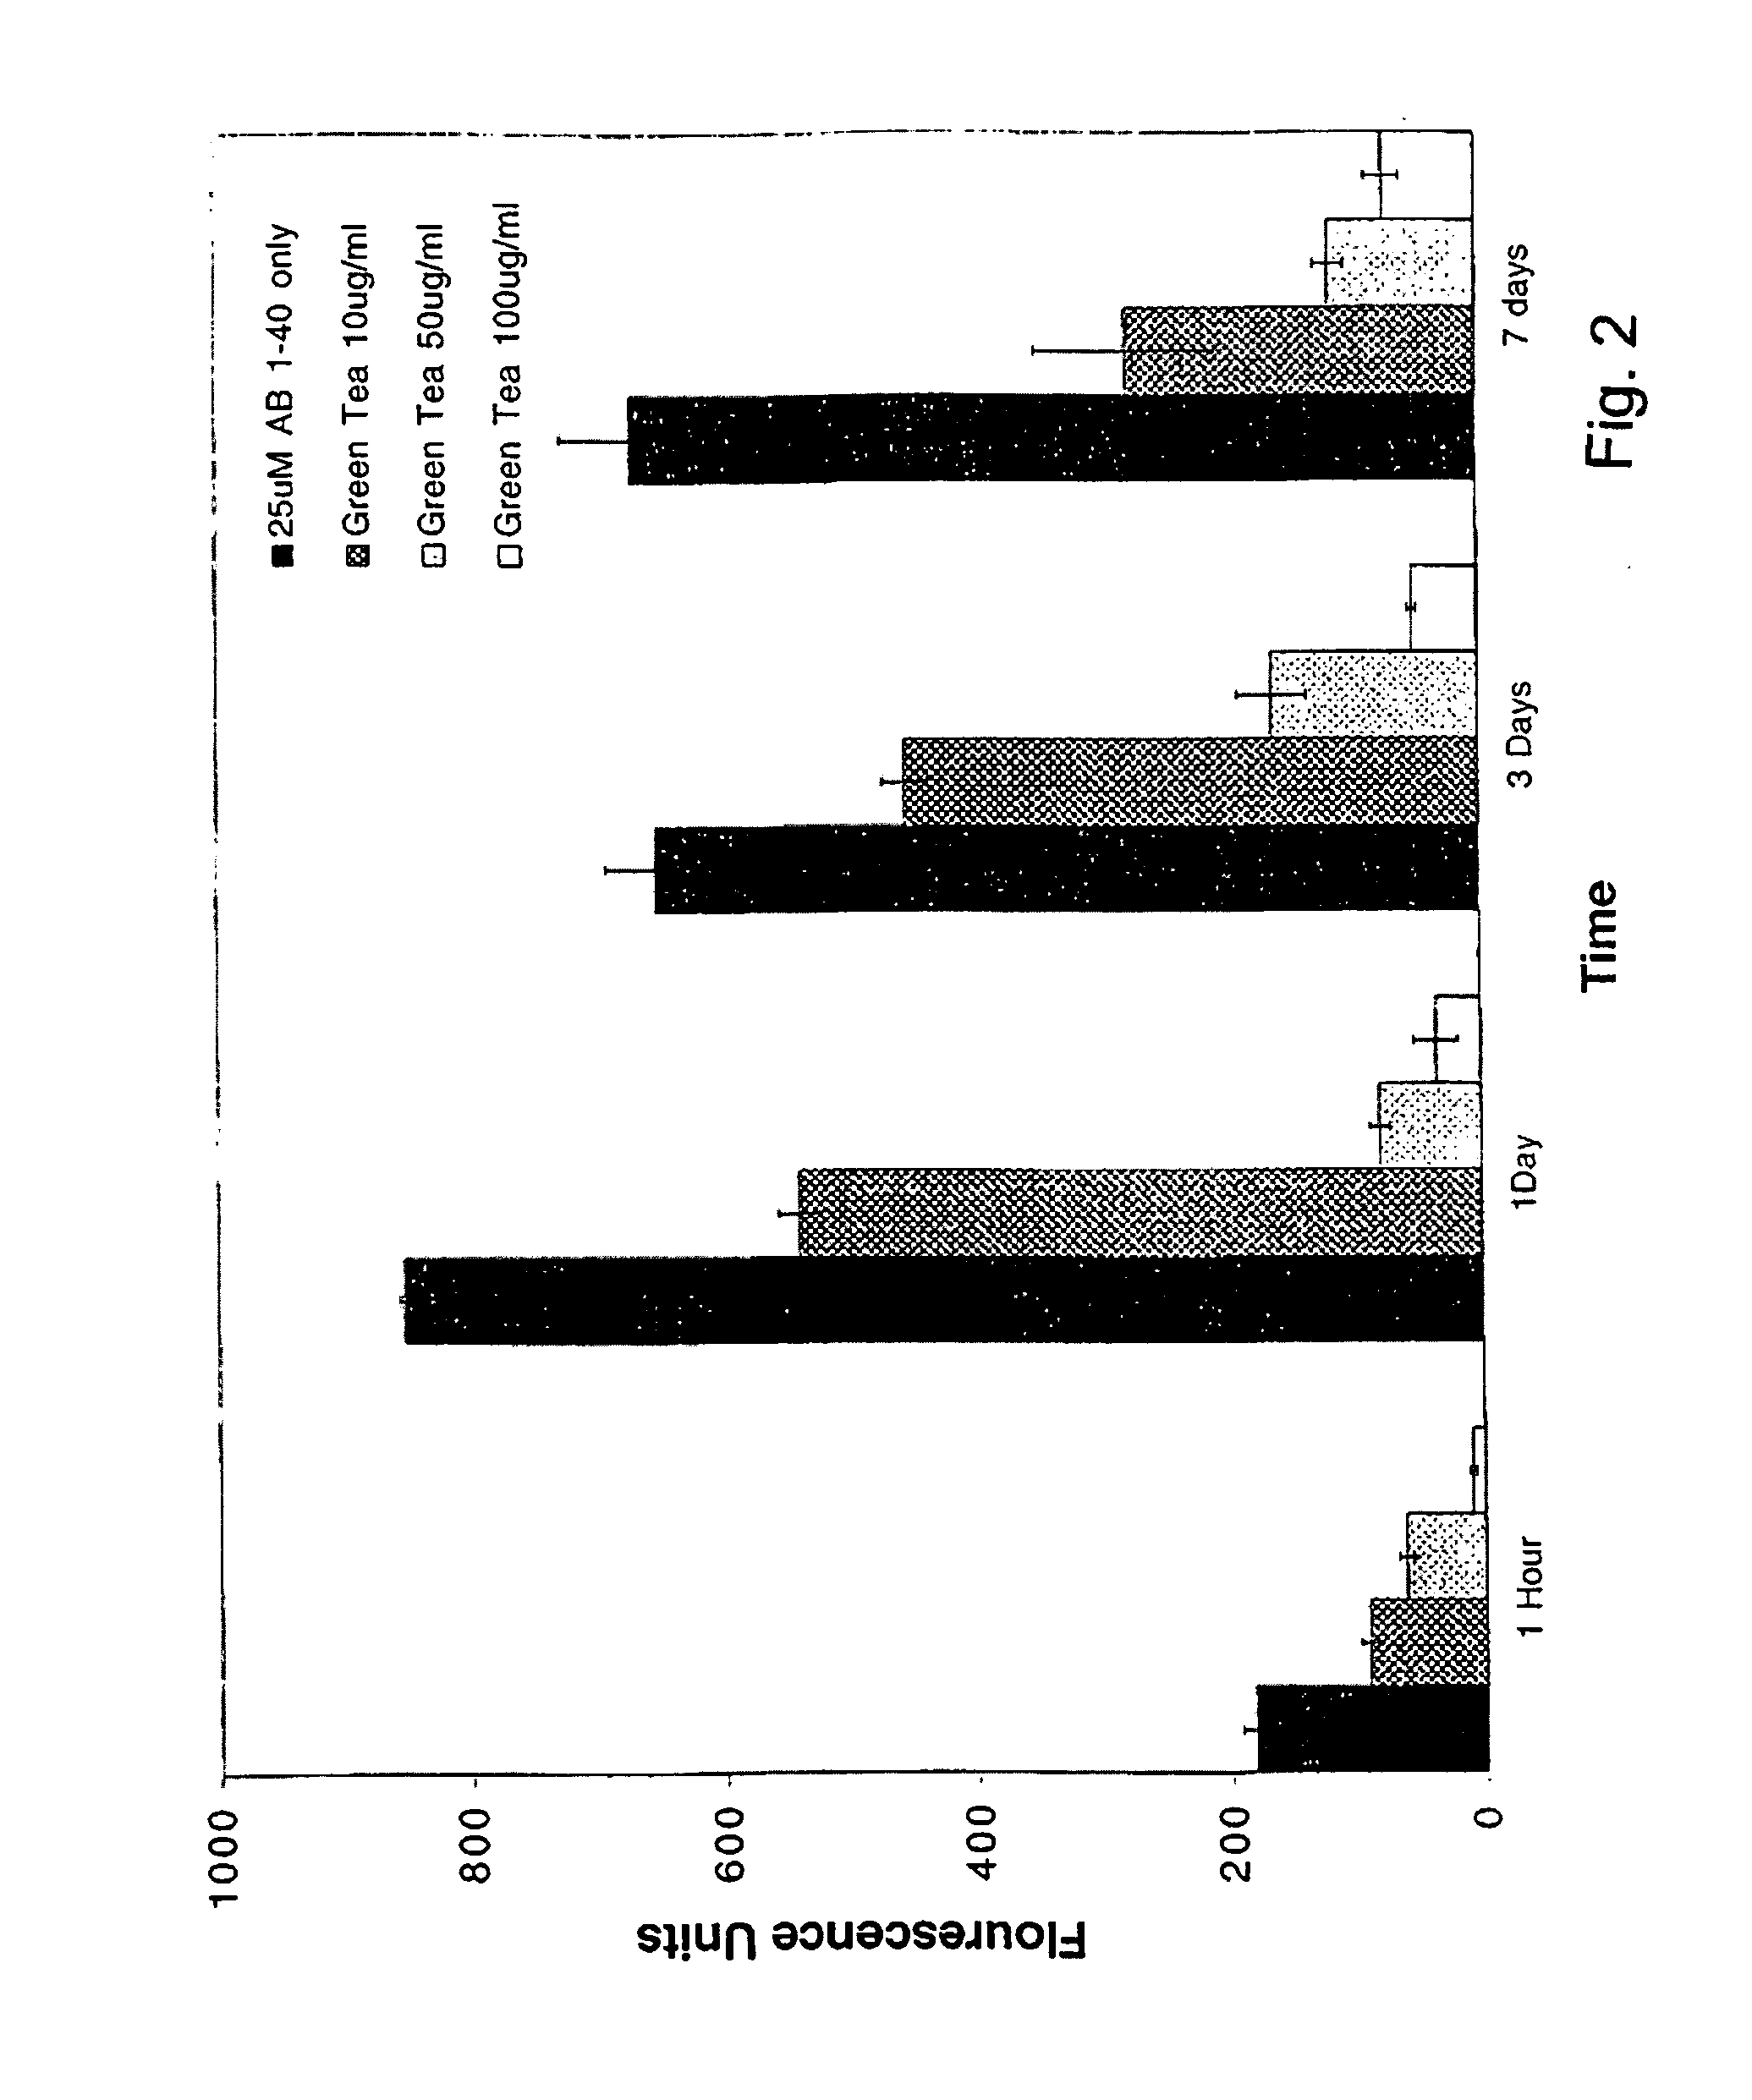 Cathechins for the Treatment of Fibrillogenesis in Alzheimer's Disease, Parkinson's Disease, Systemic AA Amyloidosis, and Other Amyloid Disorders